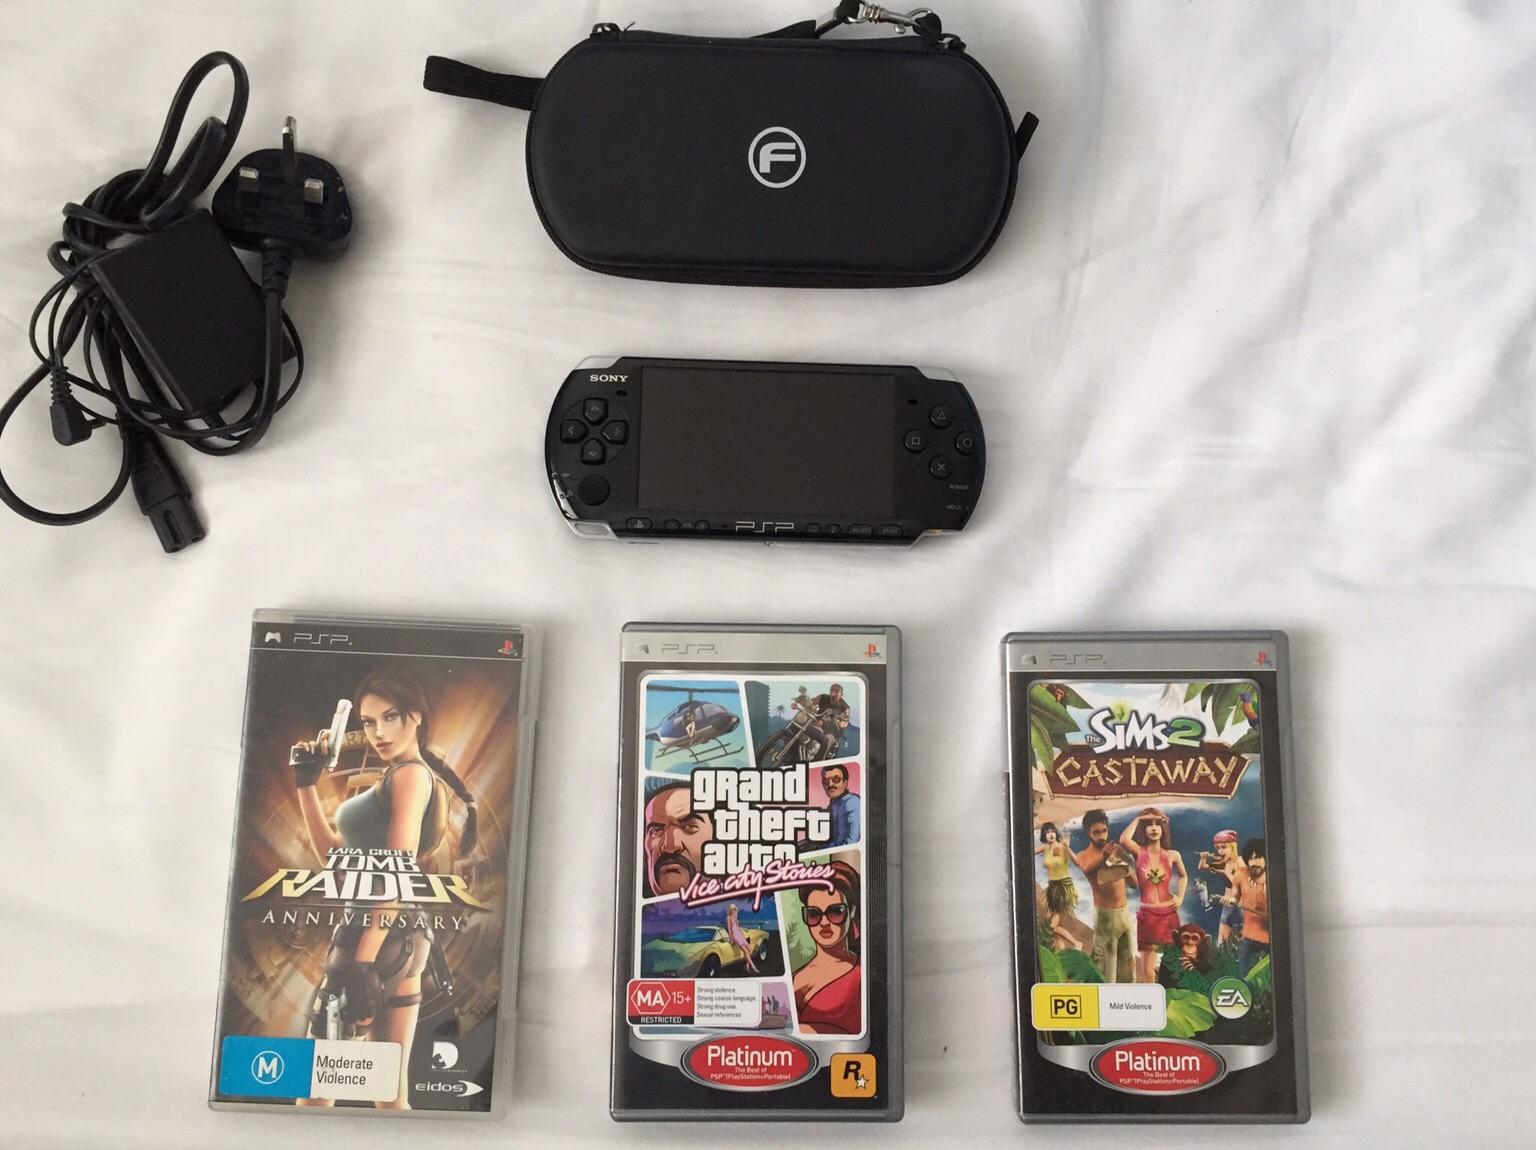 Sony Psp 3000 Console 3 Games In Se8 London For 50 00 For Sale Shpock